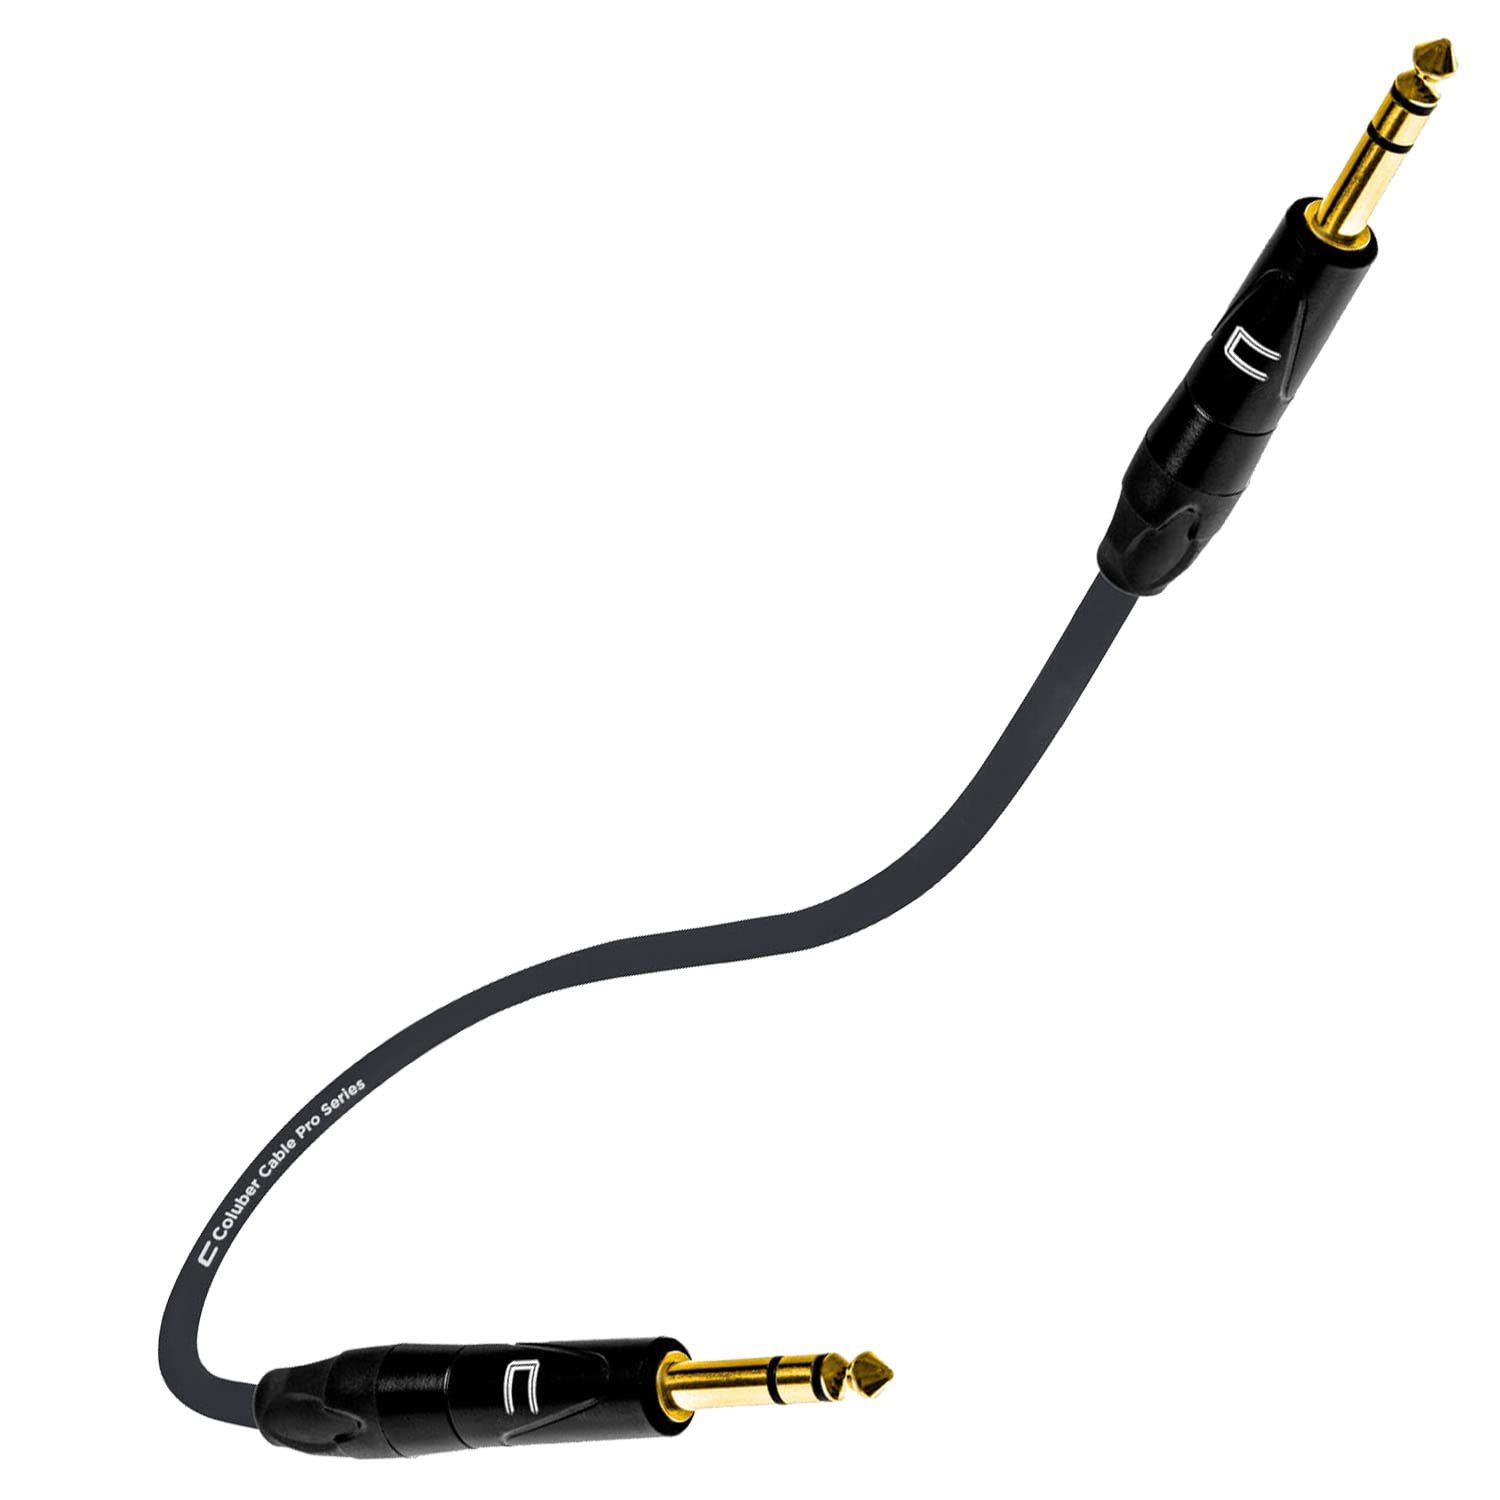 COLUBER CABLE 1/4 TRS Male to 1/4" TRS Male - 0.5 Feet - Black - 1/4 (6.35mm) Stereo Balanced Male to Male Connector for Powered Speakers, Audio Interface or Mixer for Live Performance & Recording  - Very Good